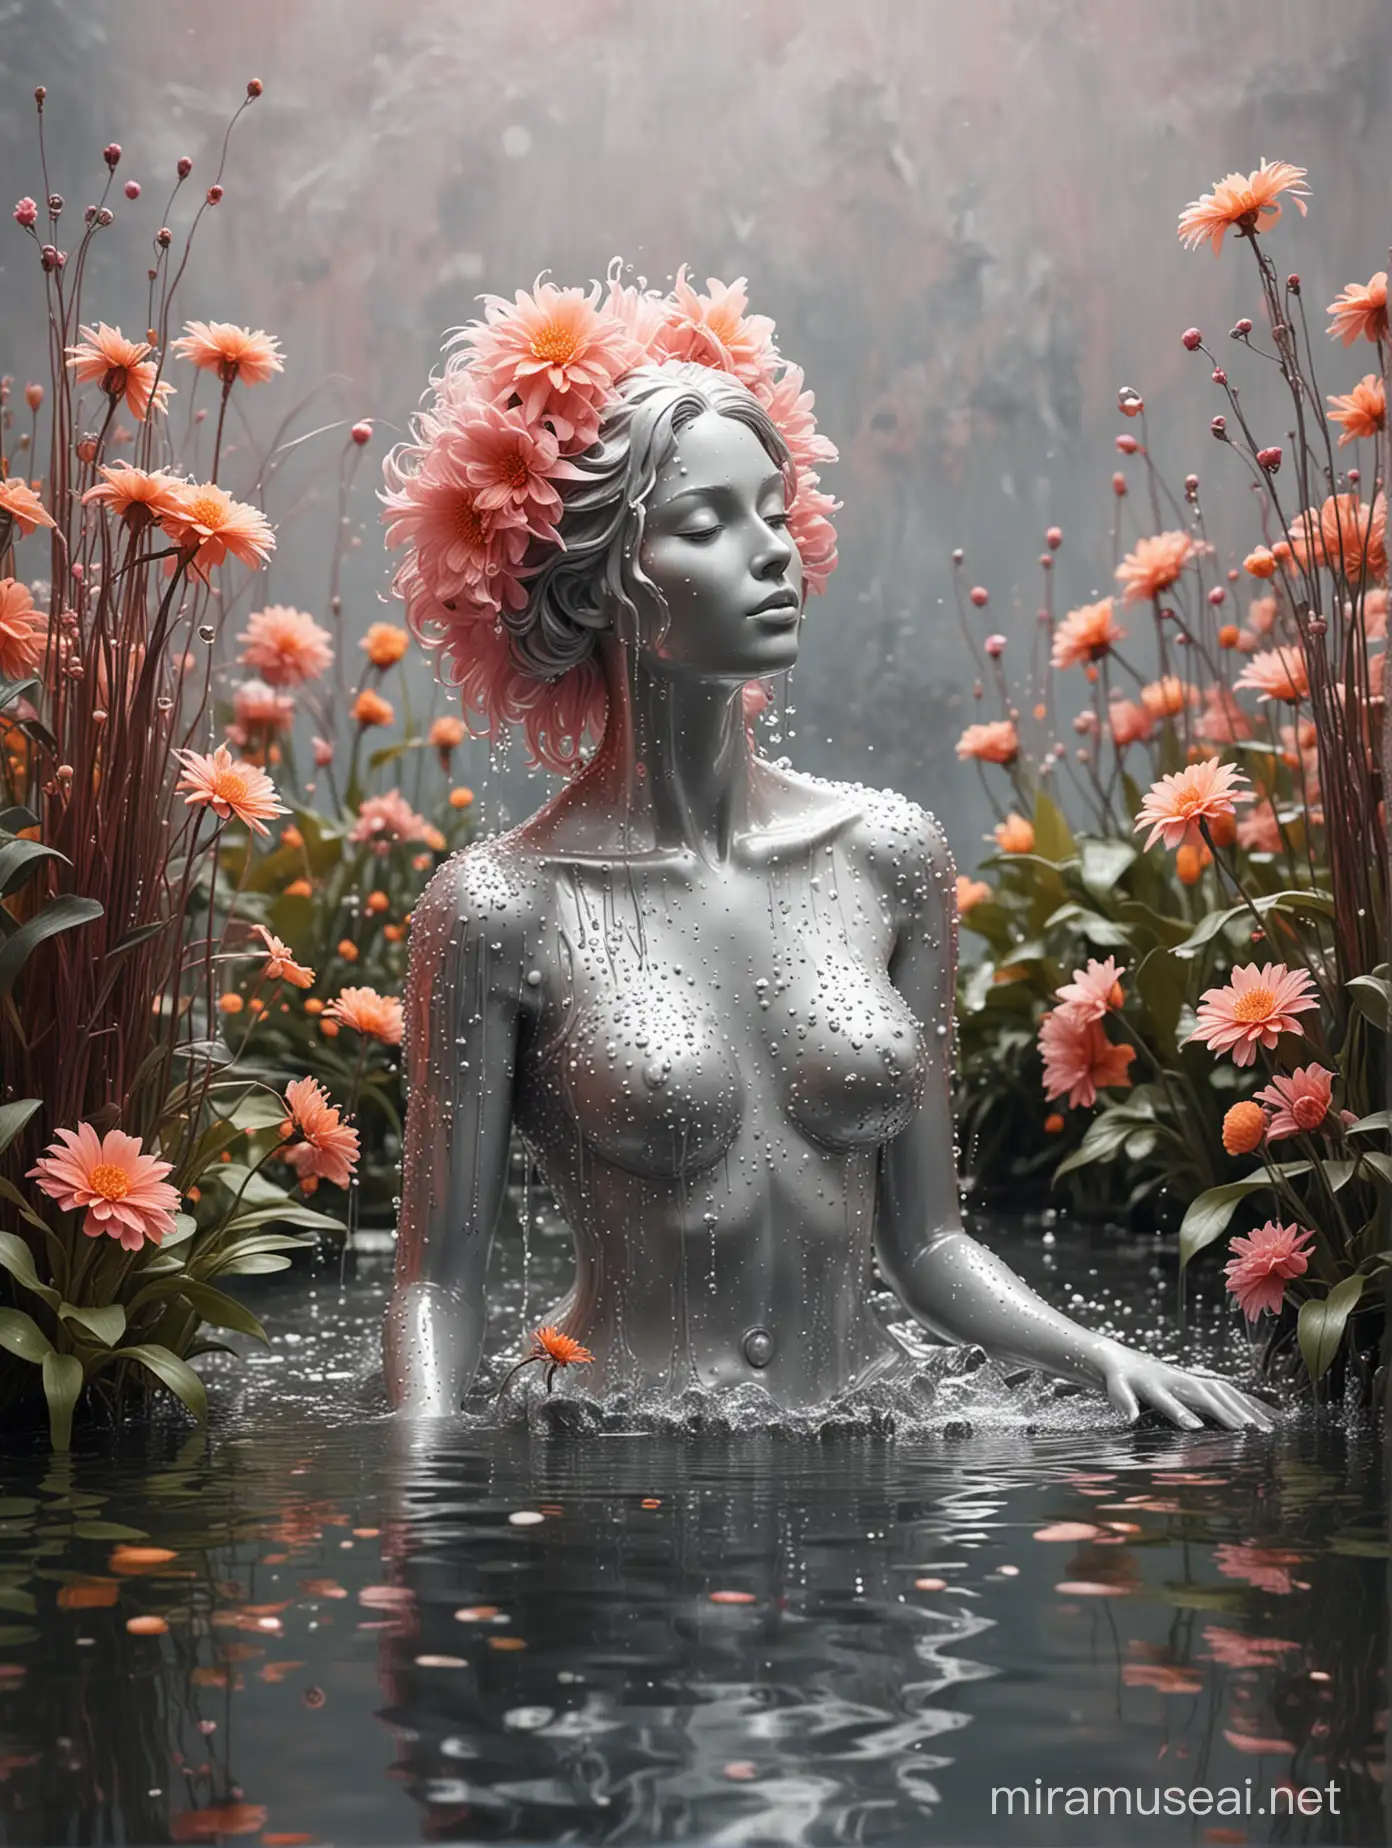 A human woman SCULPTURE, sat in the water, with water plants and flowers, with silver dots and small shapes, watering her plants, with furry pink and orange, big fur flowers, abstract liquid melt background, high fashion, vintage photography, cinematic, soft fur